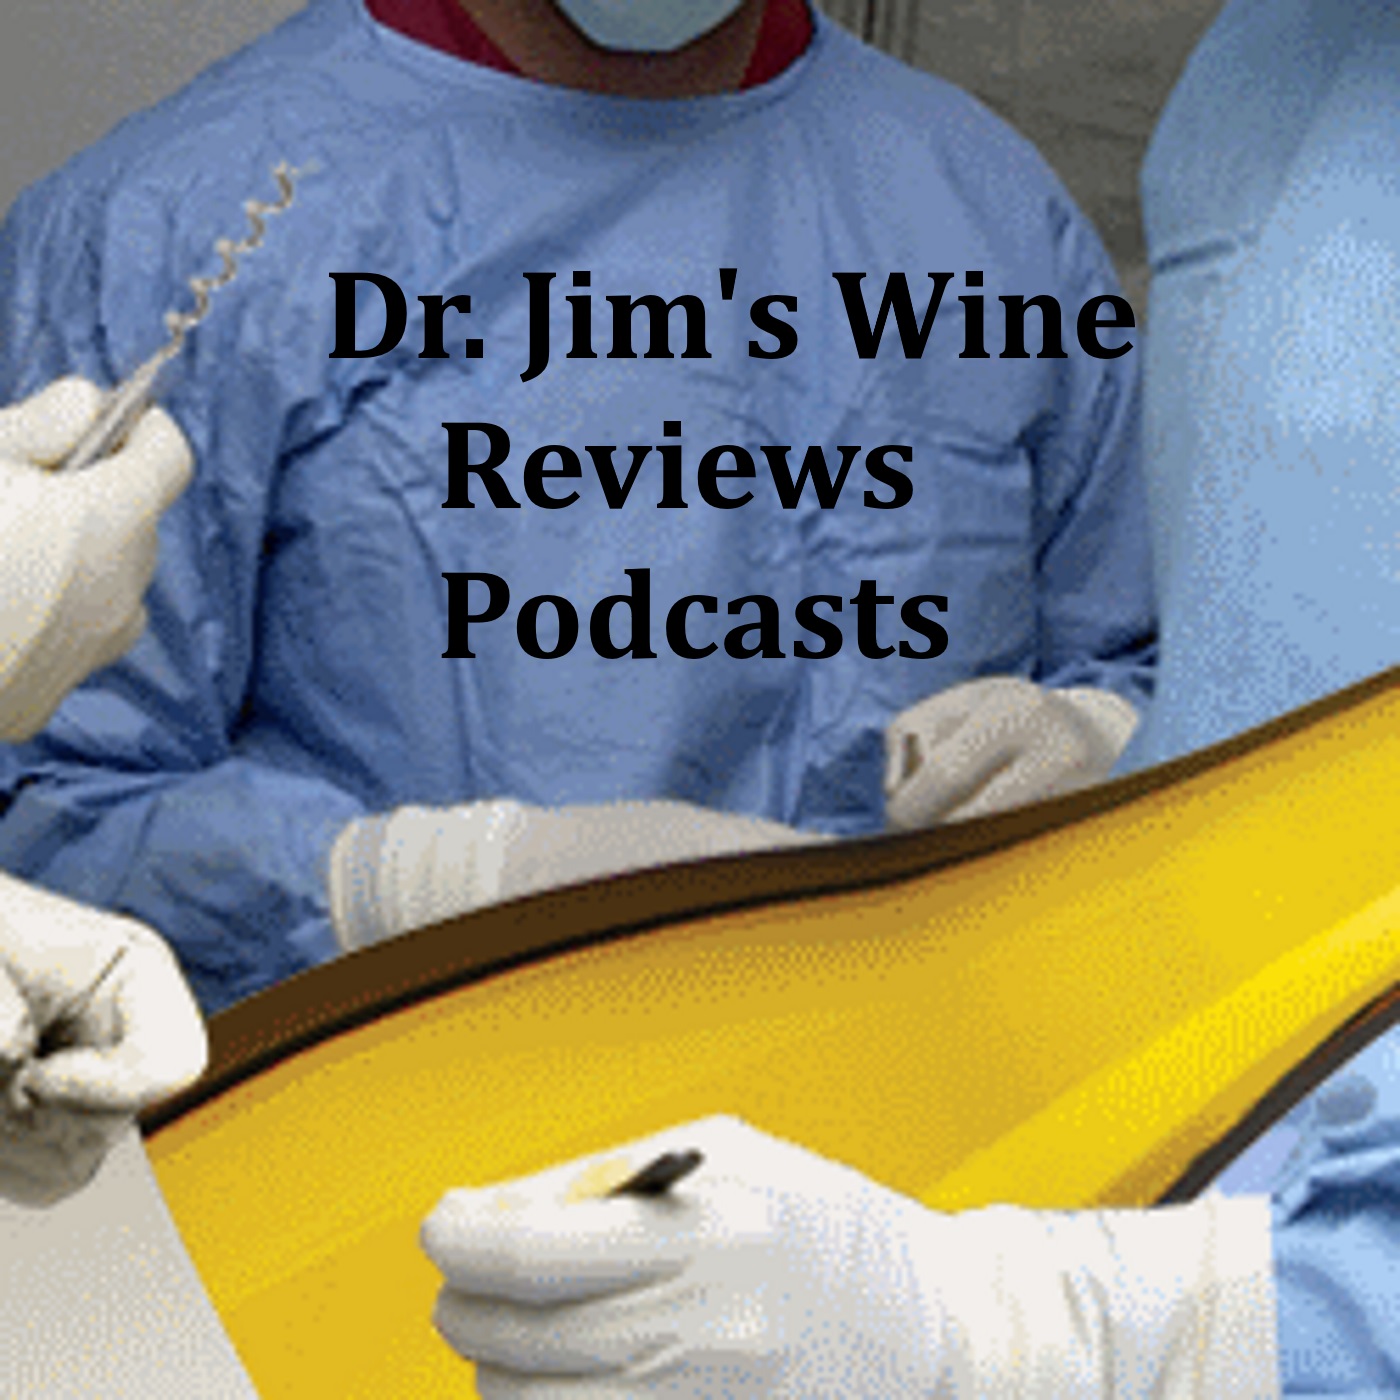 Podcast: Dr Jim's Wine Reviews